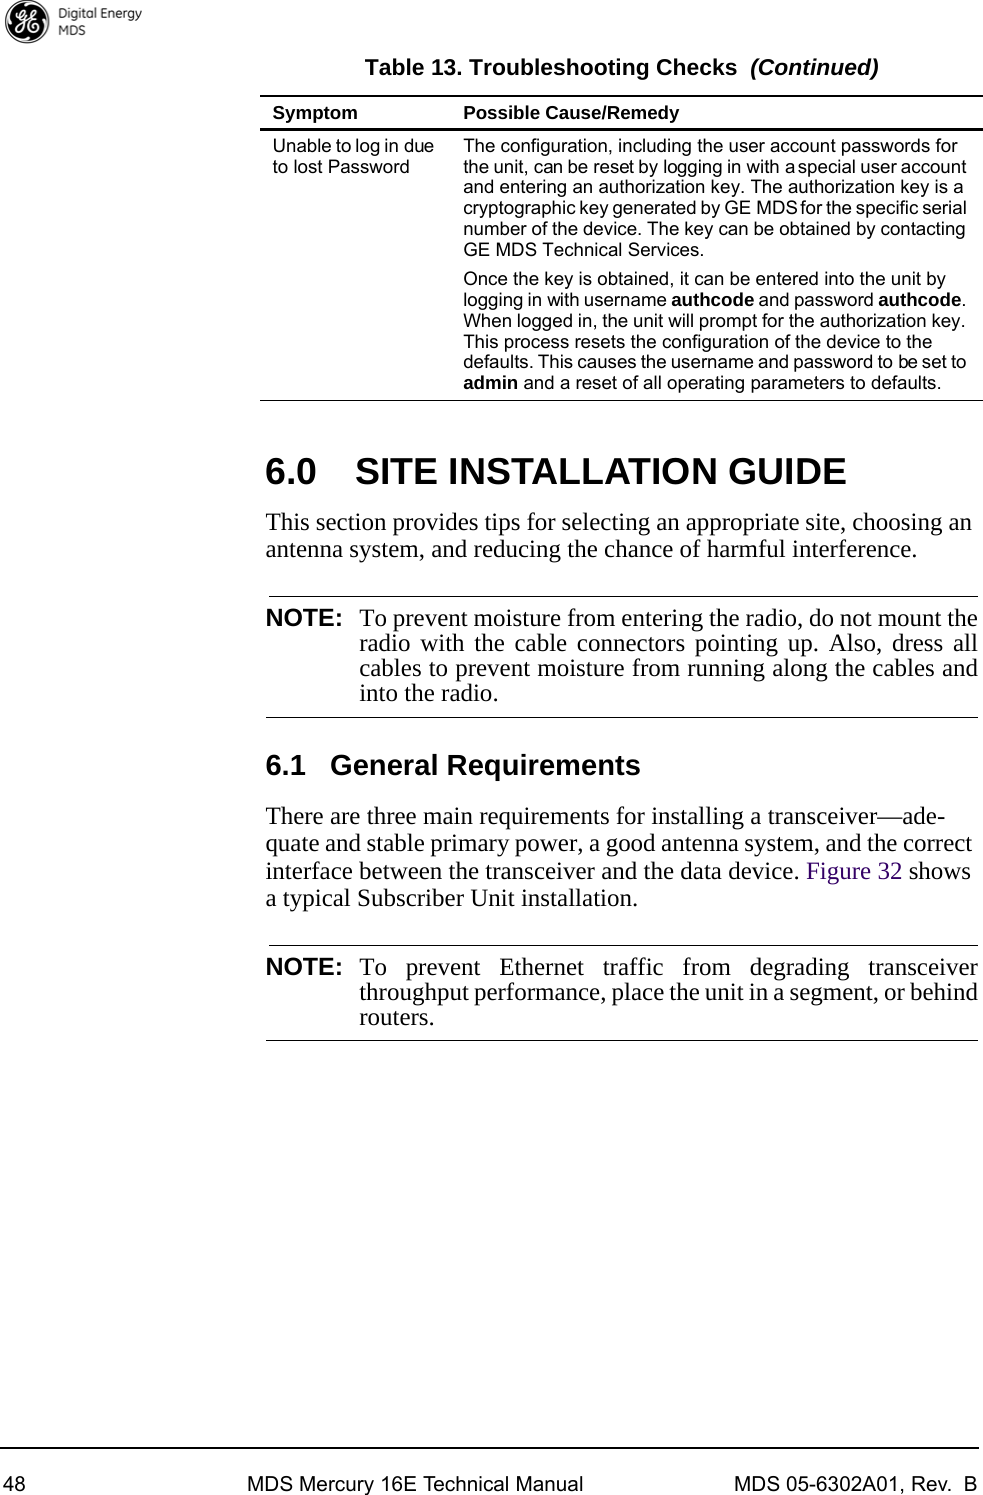 48 MDS Mercury 16E Technical Manual MDS 05-6302A01, Rev.  B6.0 SITE INSTALLATION GUIDEThis section provides tips for selecting an appropriate site, choosing an antenna system, and reducing the chance of harmful interference.NOTE: To prevent moisture from entering the radio, do not mount theradio with the cable connectors pointing up. Also, dress allcables to prevent moisture from running along the cables andinto the radio.6.1 General RequirementsThere are three main requirements for installing a transceiver—ade-quate and stable primary power, a good antenna system, and the correct interface between the transceiver and the data device. Figure 32 shows a typical Subscriber Unit installation.NOTE: To prevent Ethernet traffic from degrading transceiverthroughput performance, place the unit in a segment, or behindrouters.Unable to log in due to lost PasswordThe configuration, including the user account passwords for the unit, can be reset by logging in with a special user account and entering an authorization key. The authorization key is a cryptographic key generated by GE MDS for the specific serial number of the device. The key can be obtained by contacting GE MDS Technical Services. Once the key is obtained, it can be entered into the unit by logging in with username authcode and password authcode. When logged in, the unit will prompt for the authorization key. This process resets the configuration of the device to the defaults. This causes the username and password to be set to admin and a reset of all operating parameters to defaults.Table 13. Troubleshooting Checks (Continued) Symptom Possible Cause/Remedy